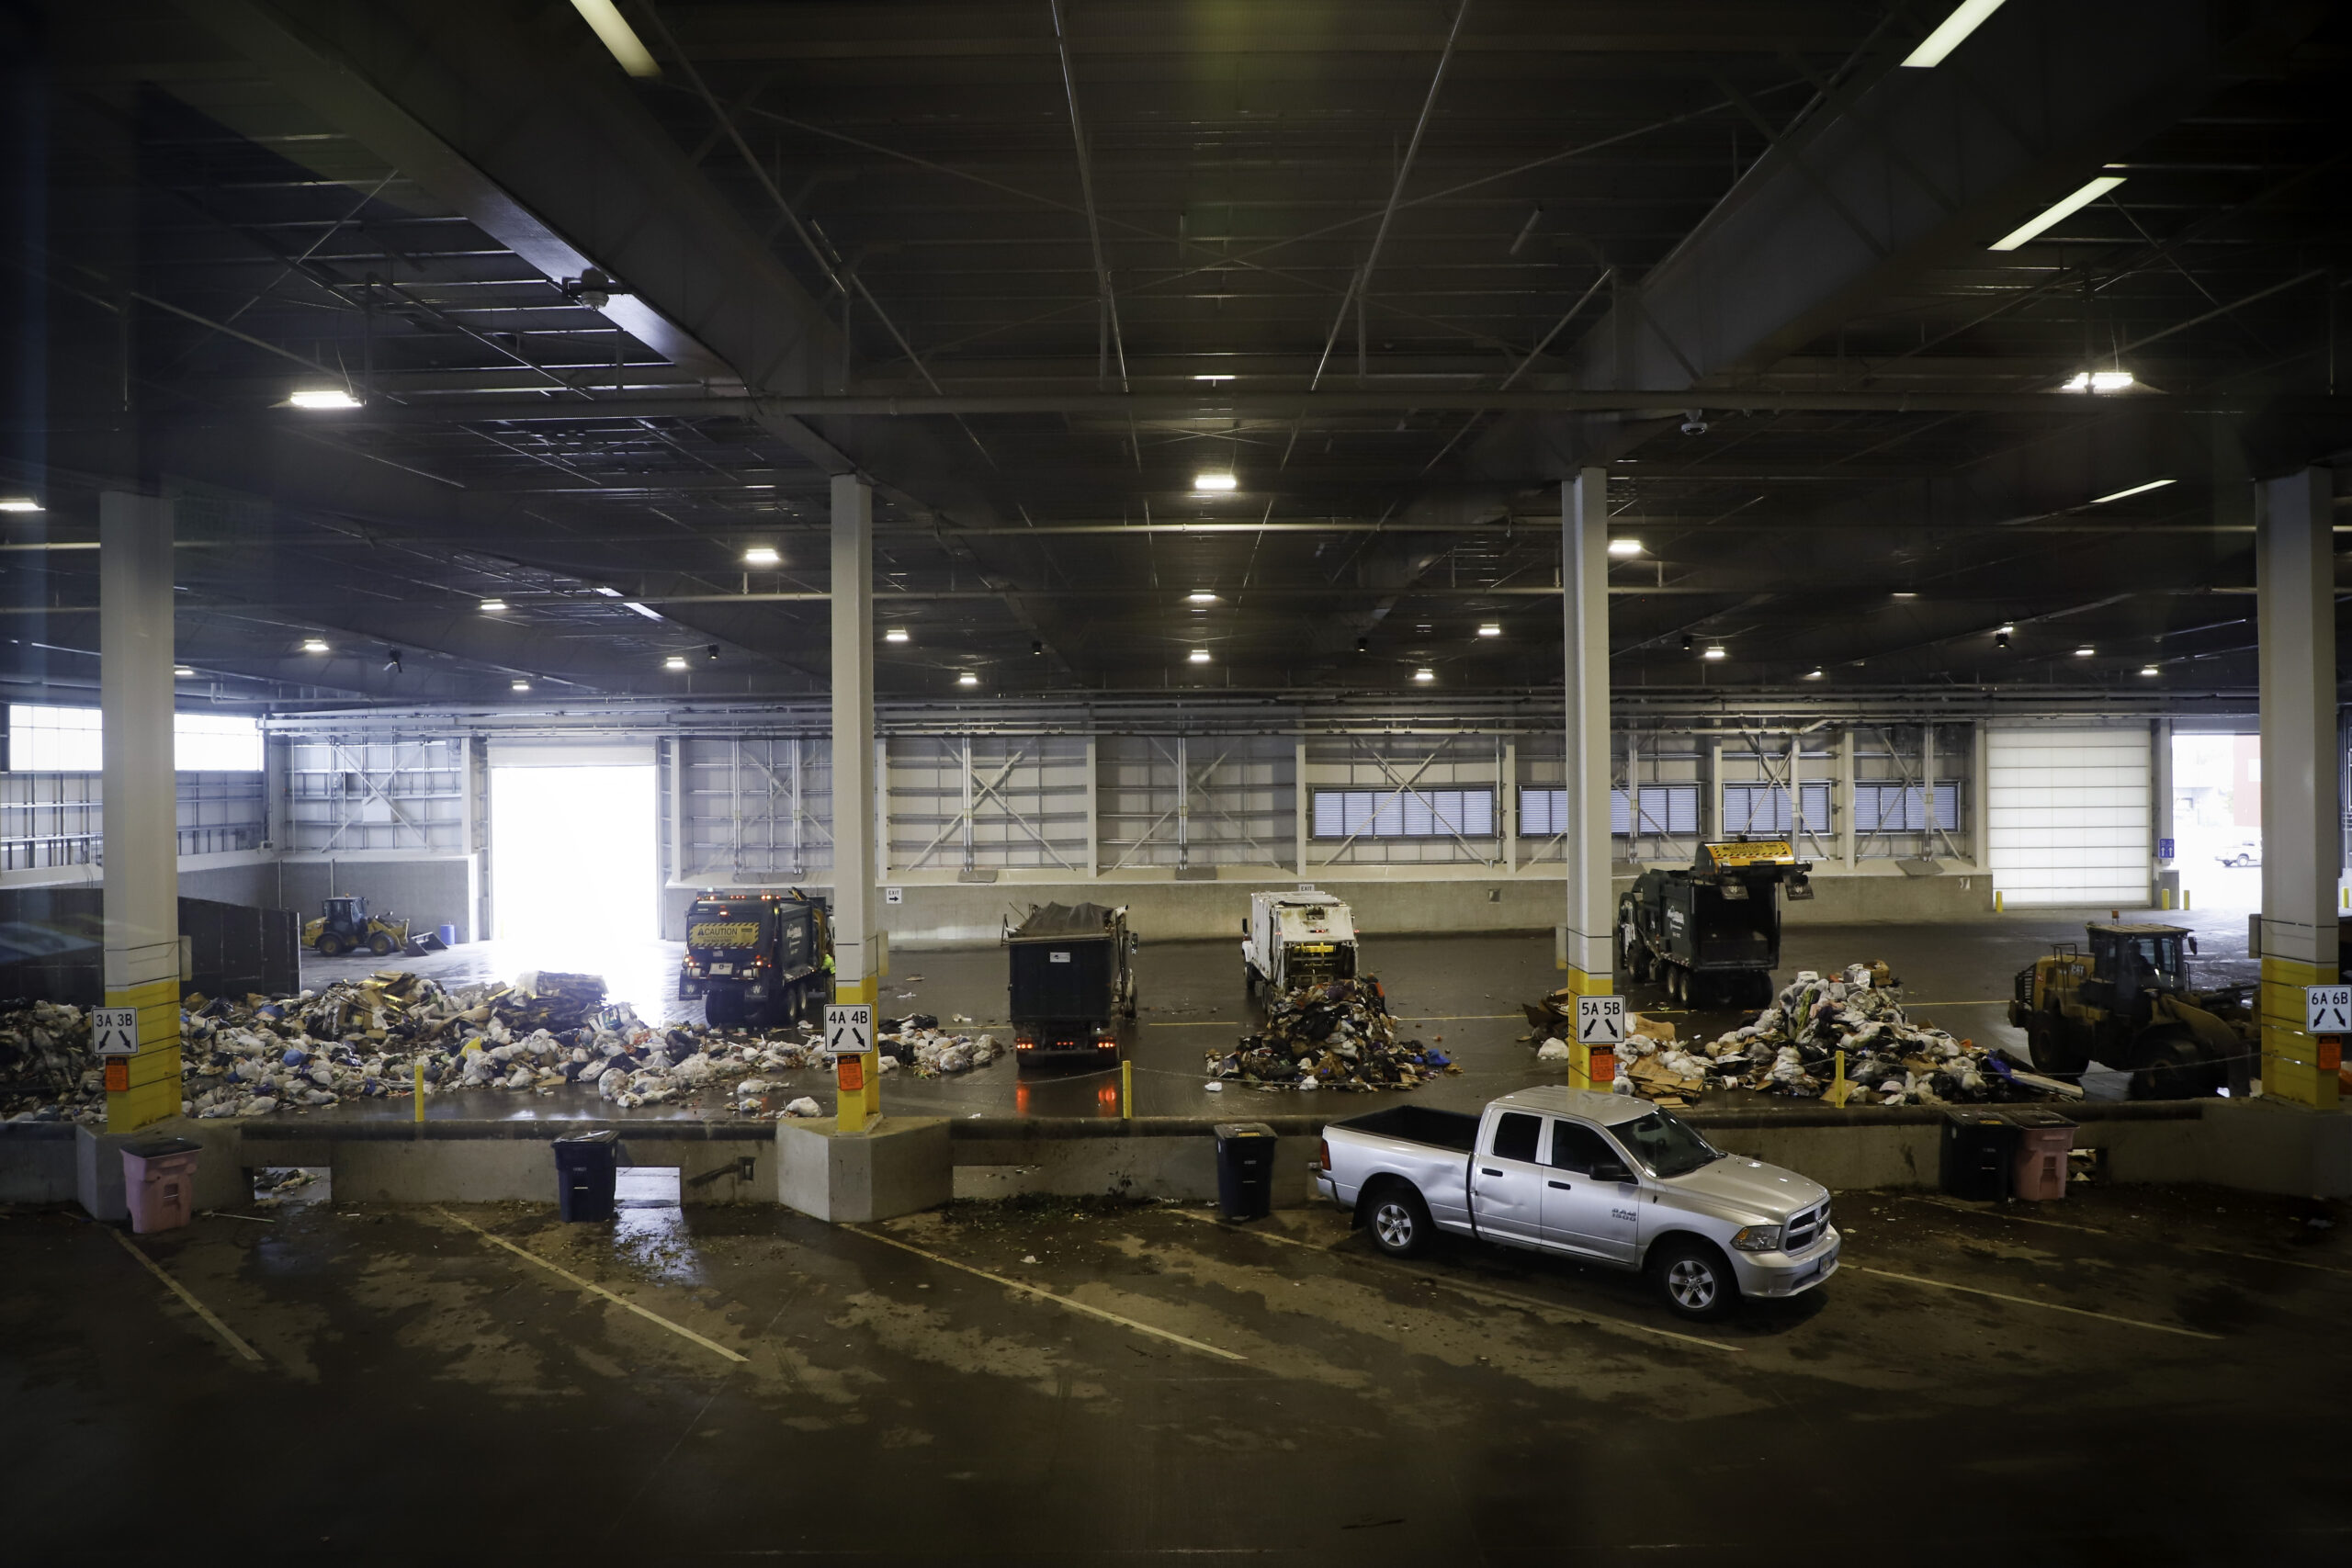 A view of the tipping floor from the observation deck of waste services dumping waste onto the floor.